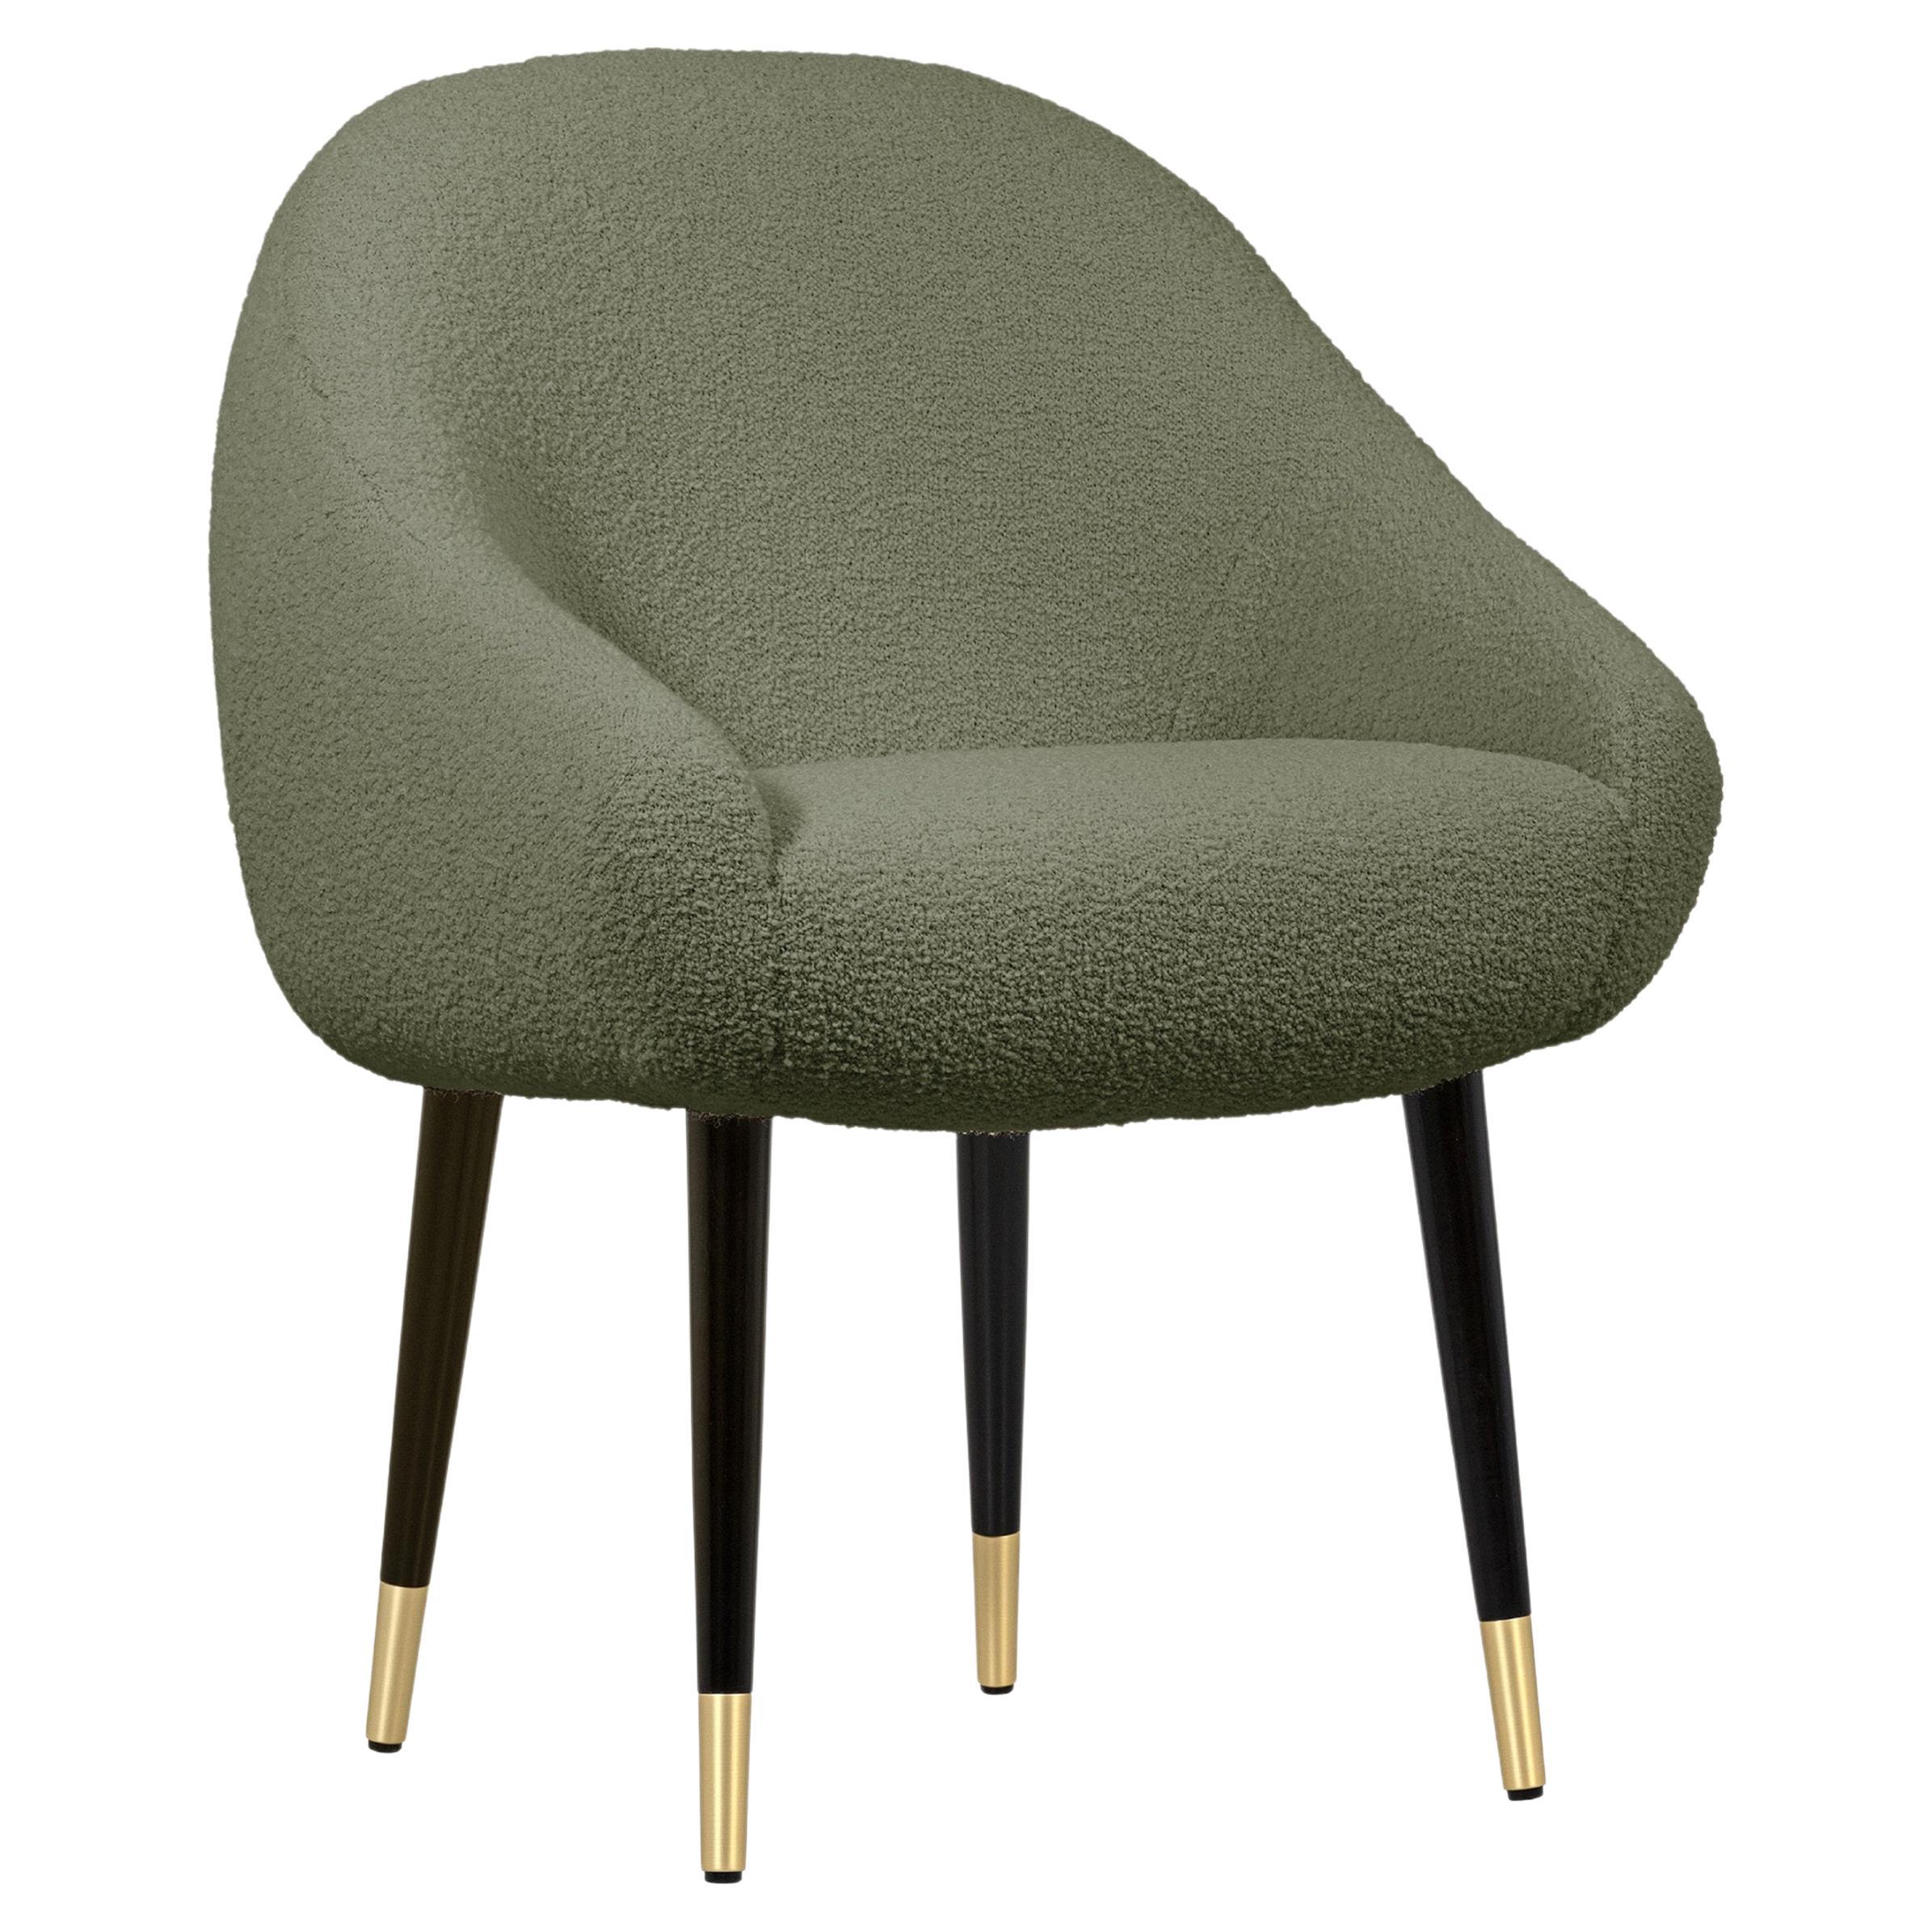 Niemeyer Dining Chair, Bouclé and Brass, Insidherland by Joana Santos Barbosa For Sale